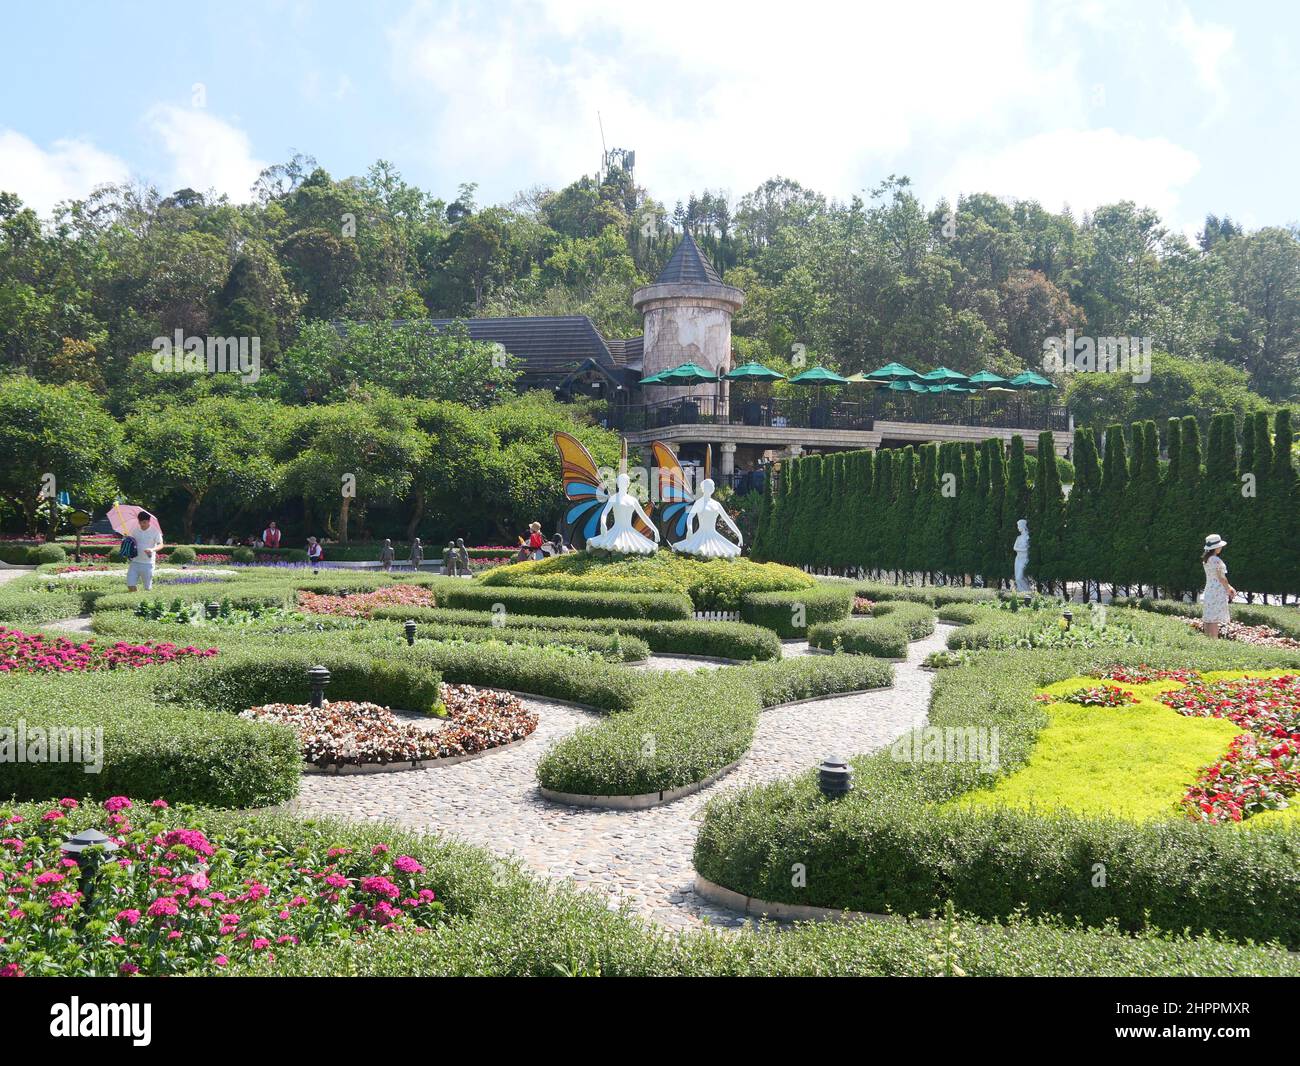 Da Nang, Vietnam - April 12, 2021: Tourists in the flowers and statues garden at Ba Na hills, a famous theme park and resort in Central Vietnam Stock Photo